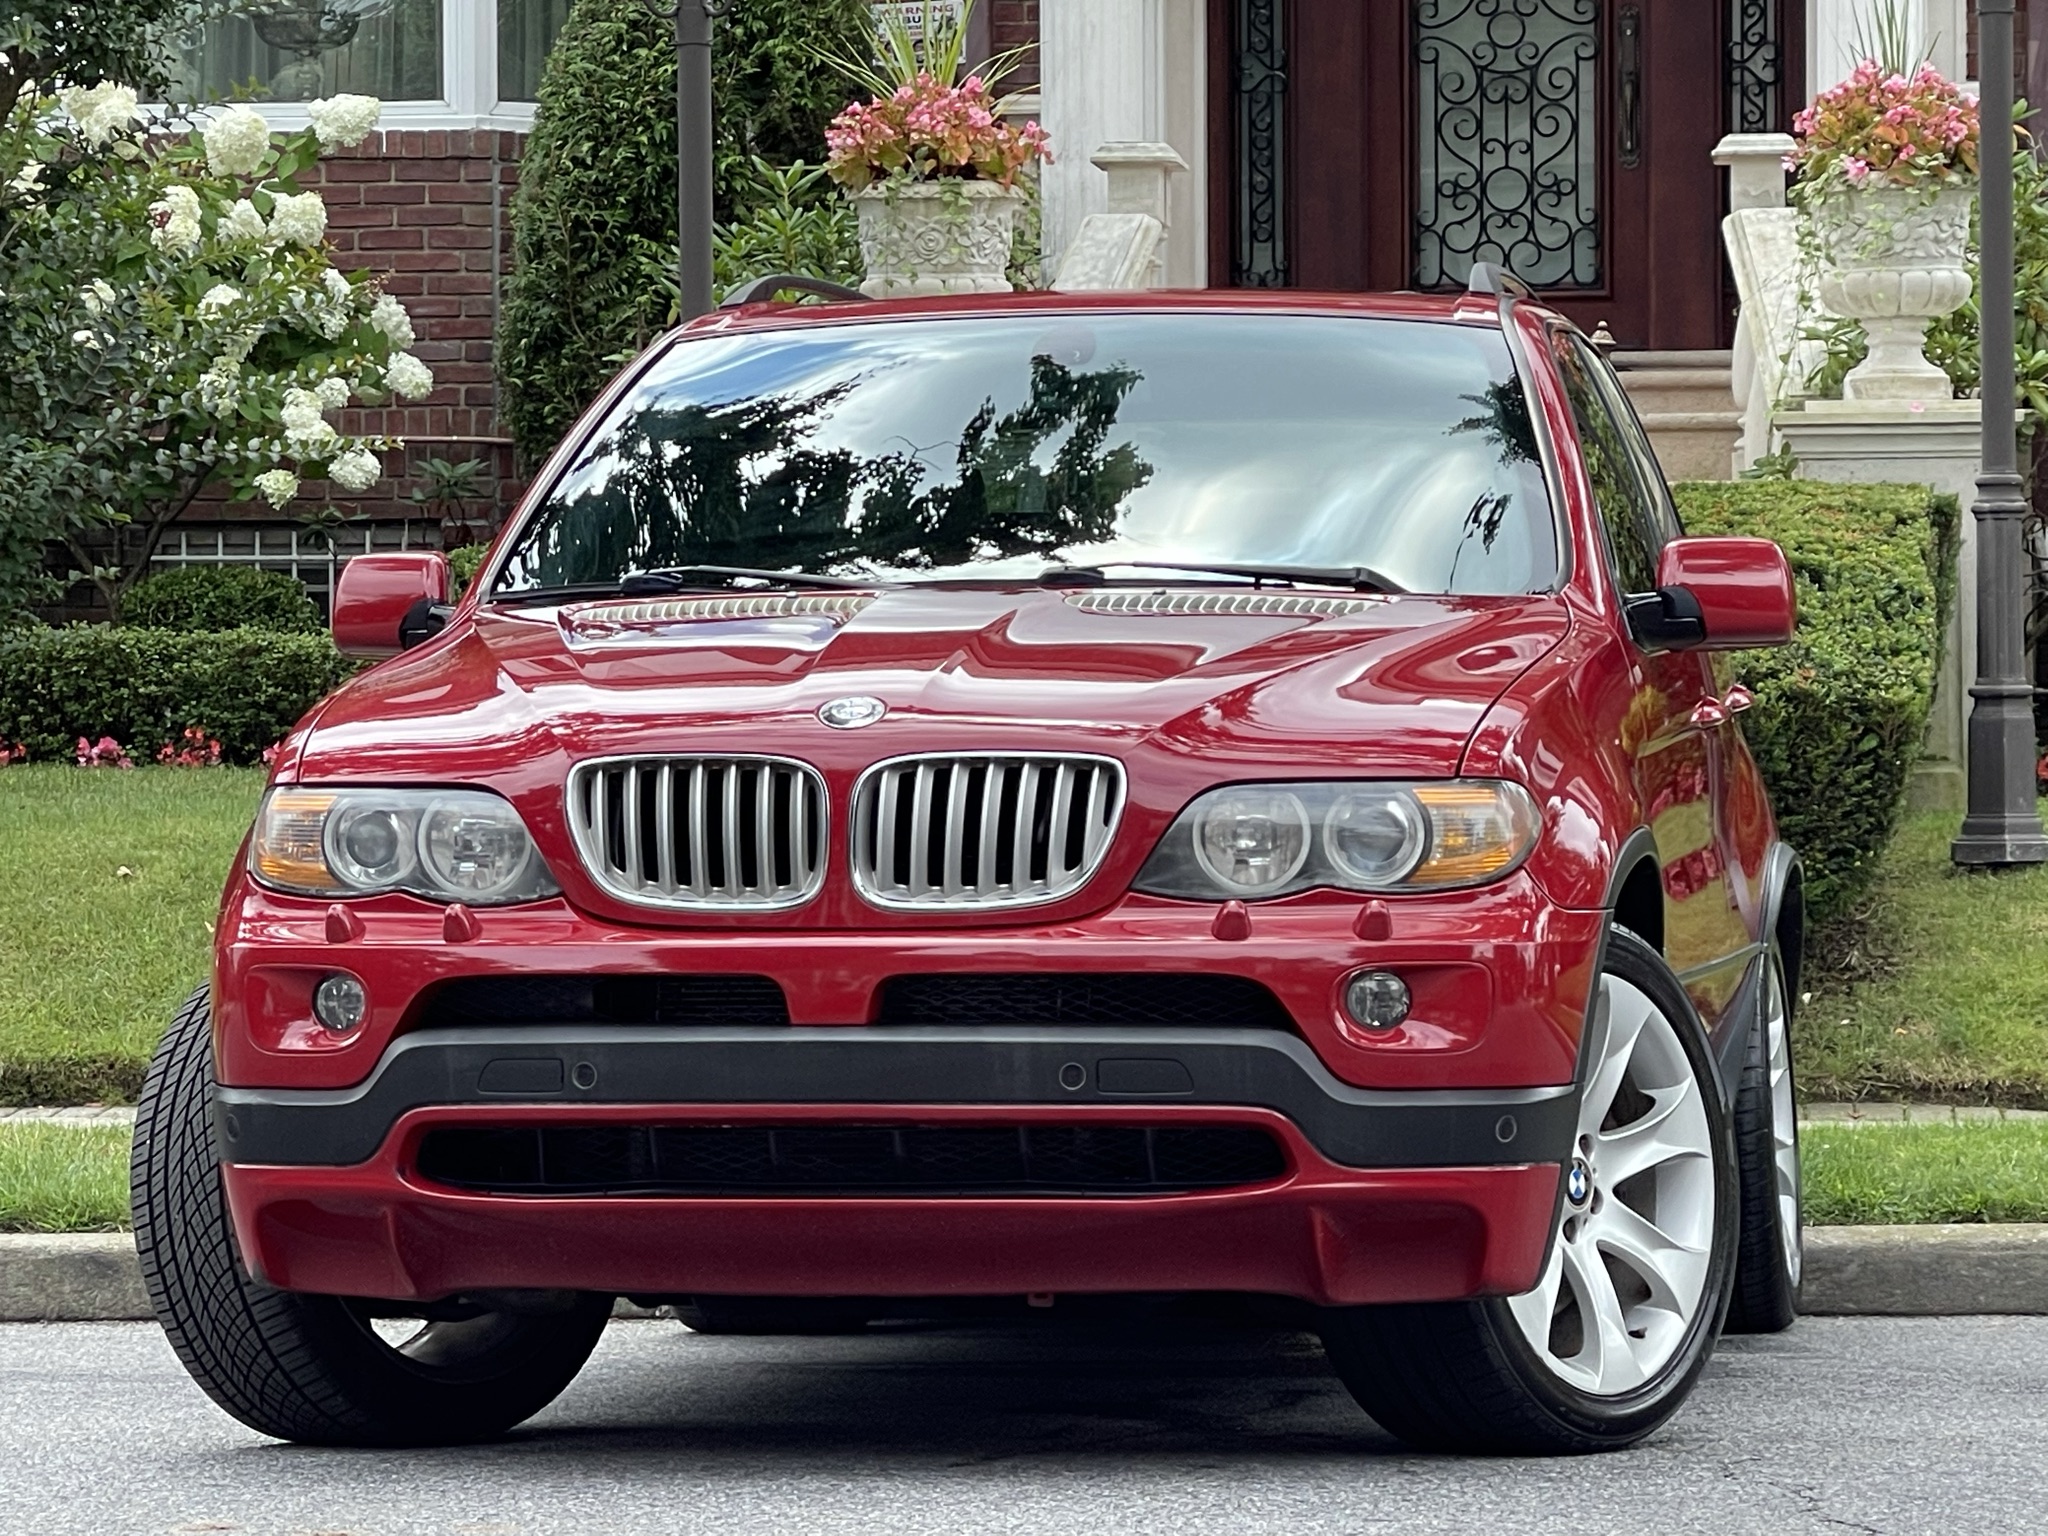 Buy Used 2004 BMW X5 4.8IS for $13 900 from trusted dealer in Brooklyn, NY!